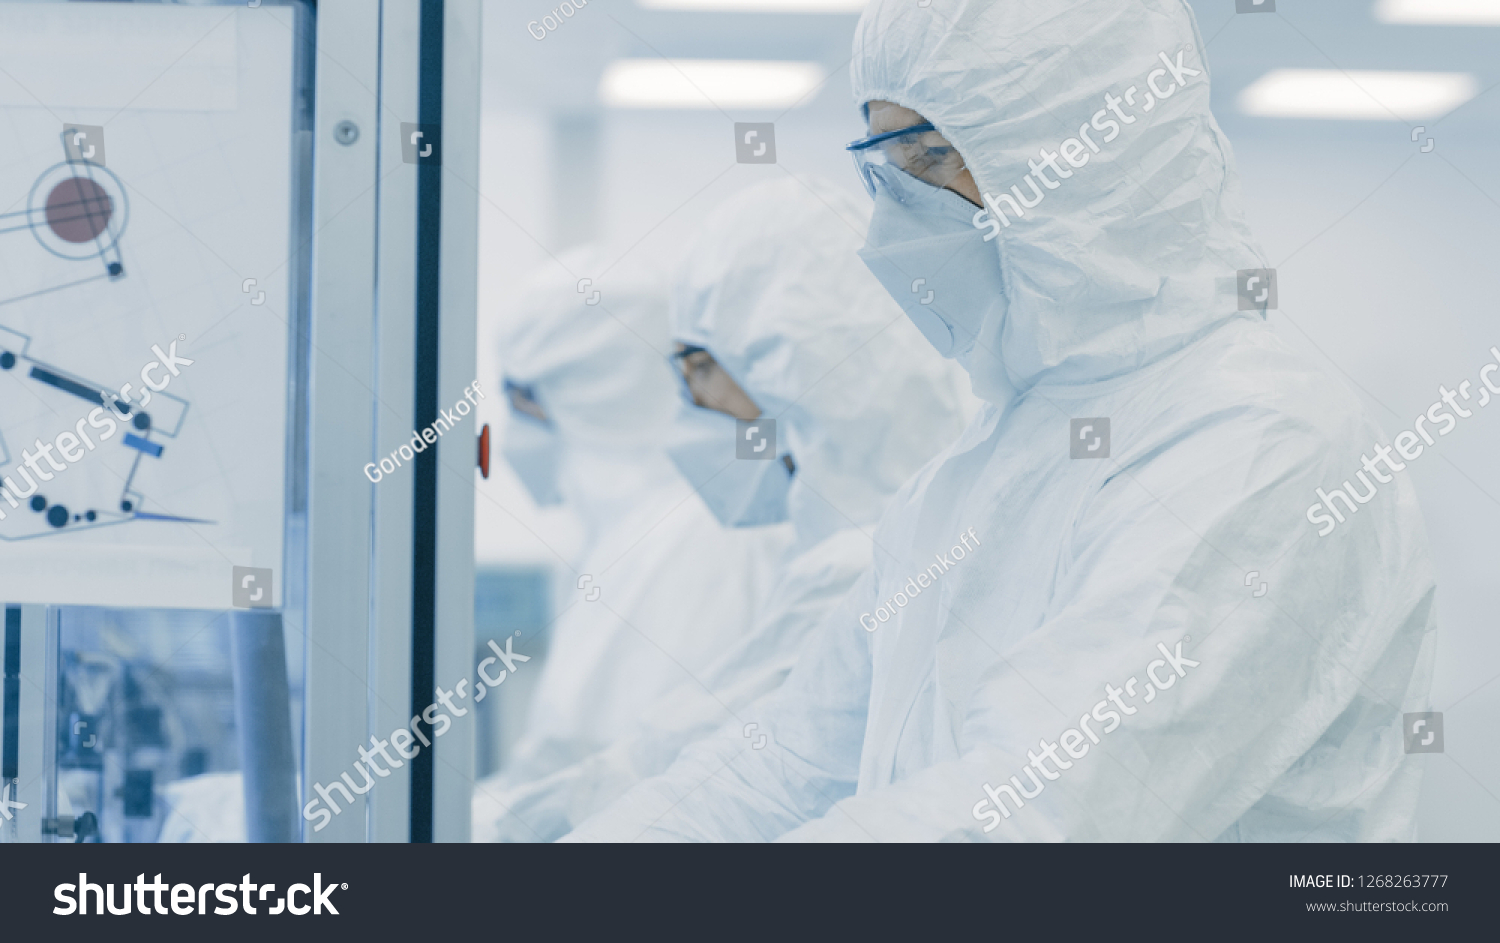 On a Factory Team of Scientists in Sterile Protective Clothing Work on a Modern Industrial 3D Printing Machinery. Pharmaceutical, Biotechnological and Semiconductor Creating / Manufacturing Process. #1268263777